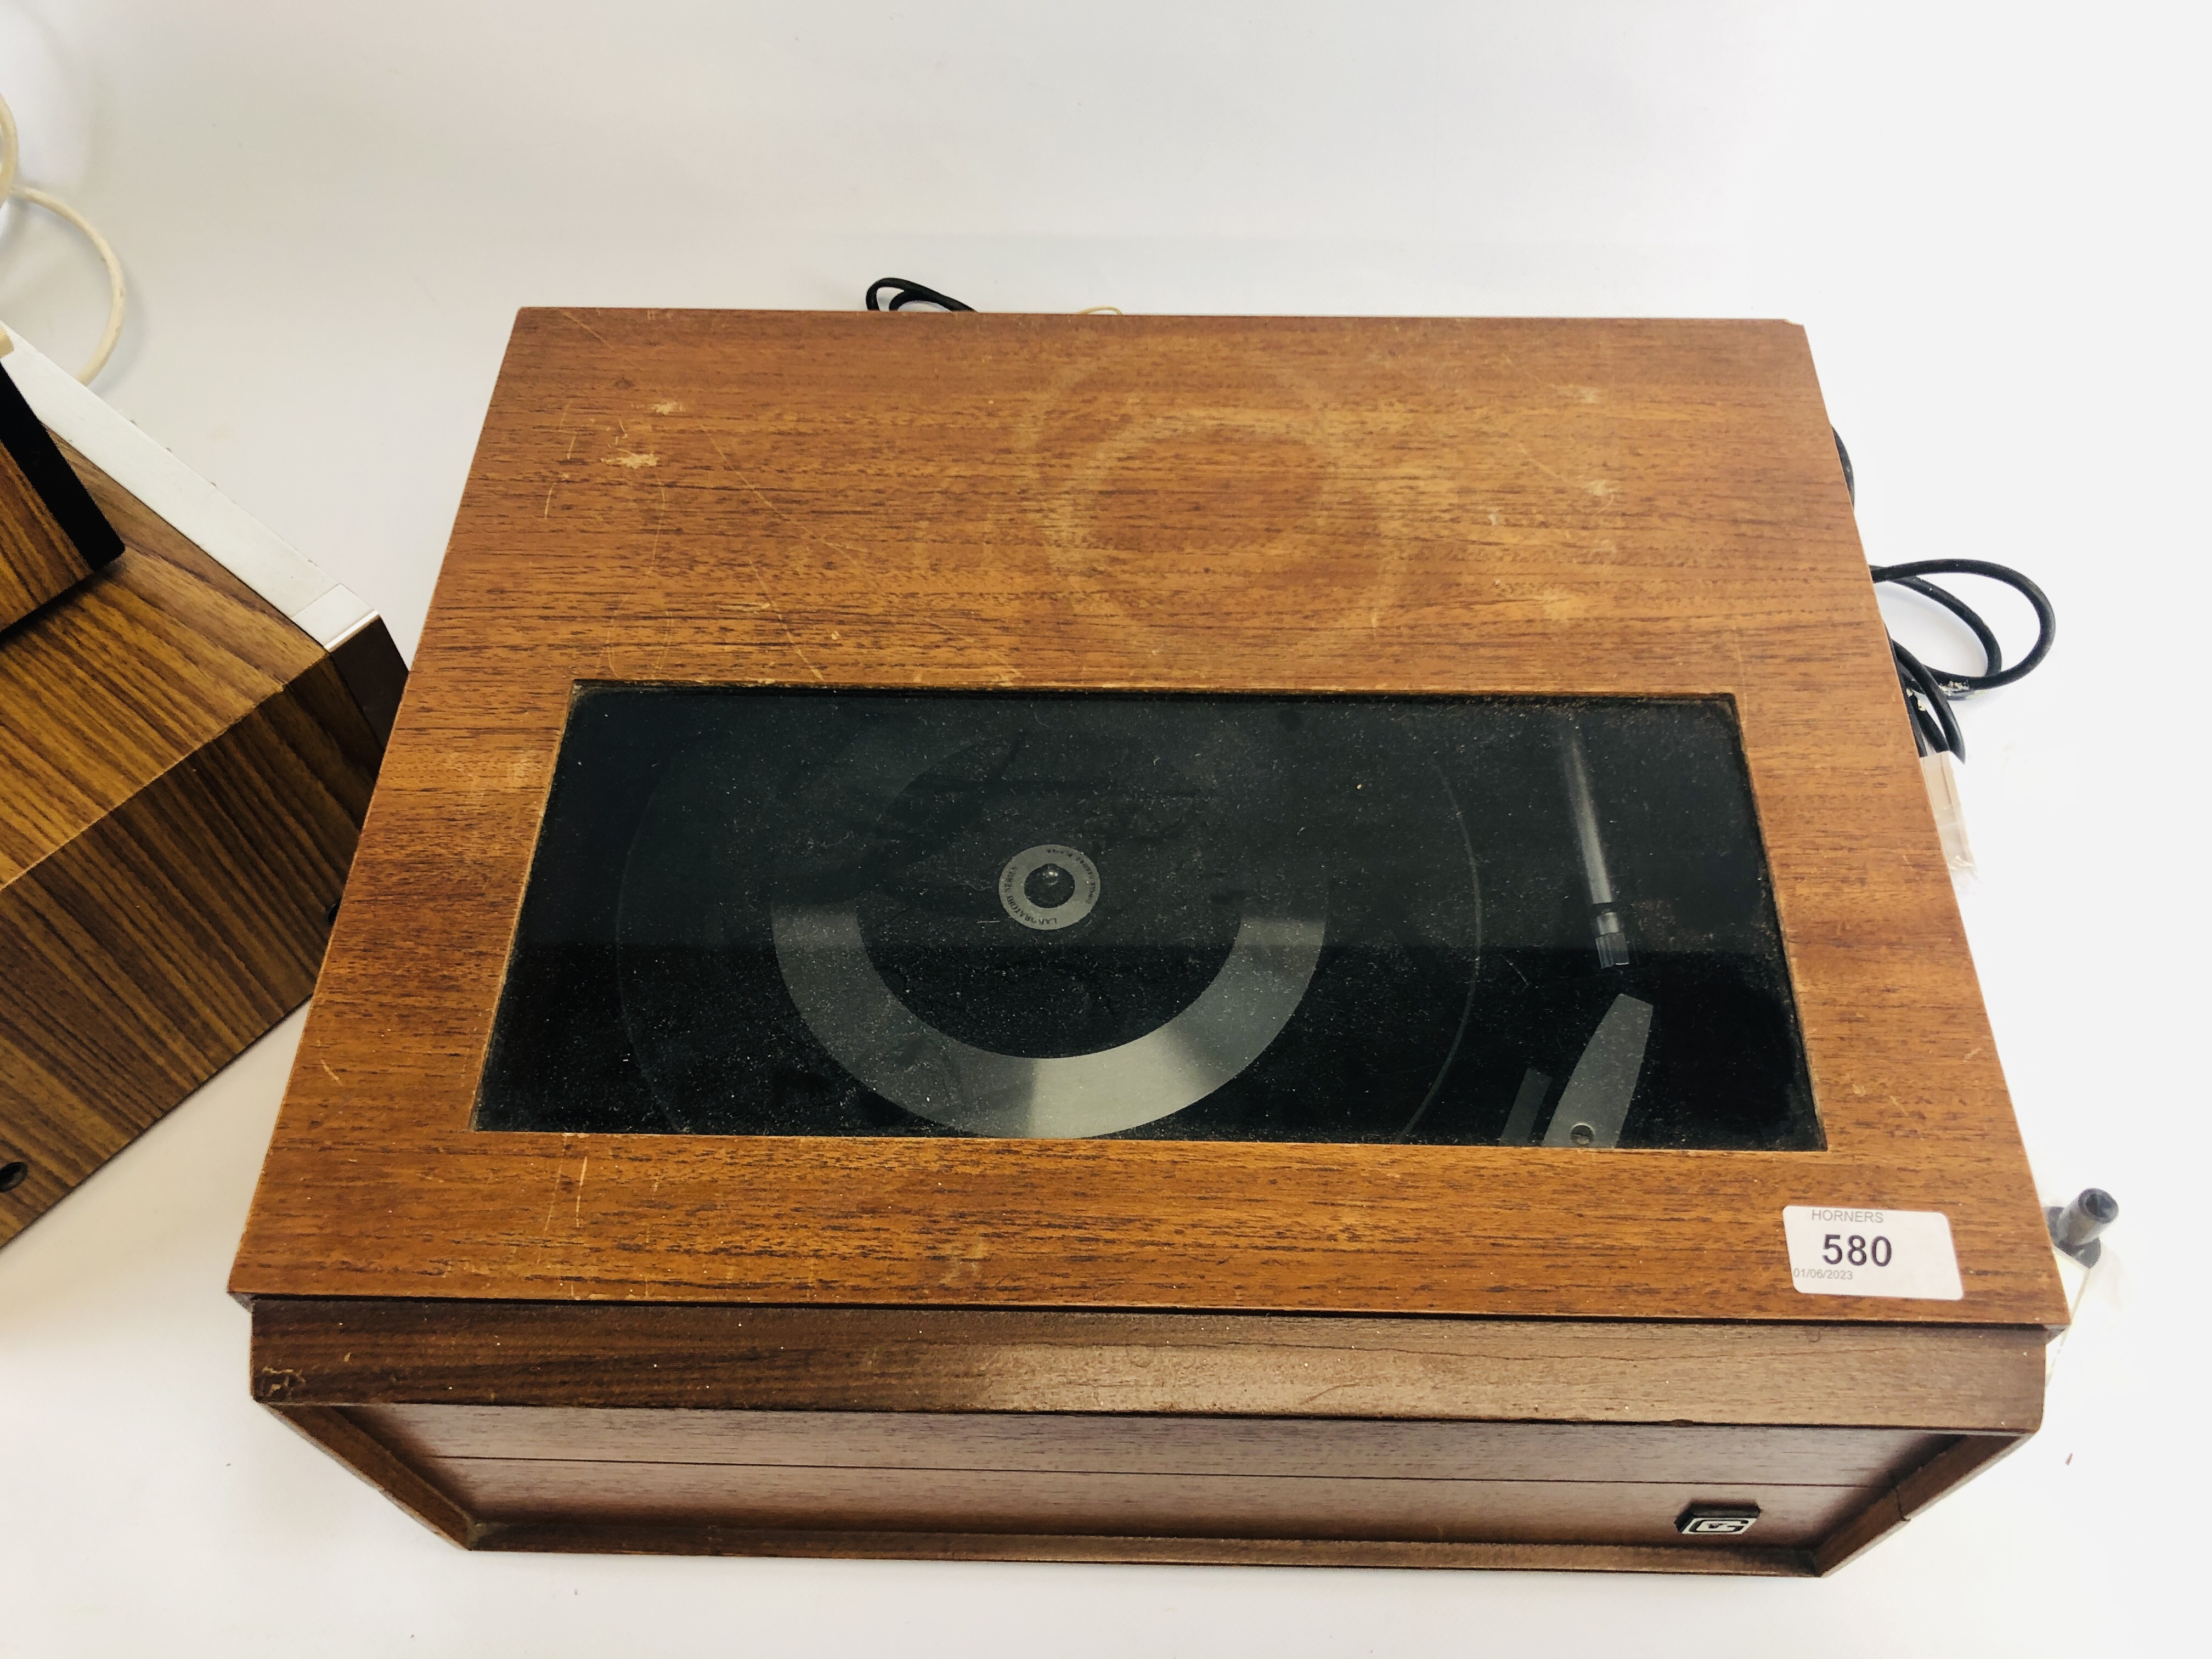 A GOODMANS GARARD MUSIC SWEET RECORD PLAYER MODEL 3025 ALONG WITH TWO PIECES OF ROTEL AUDIO - Image 7 of 8